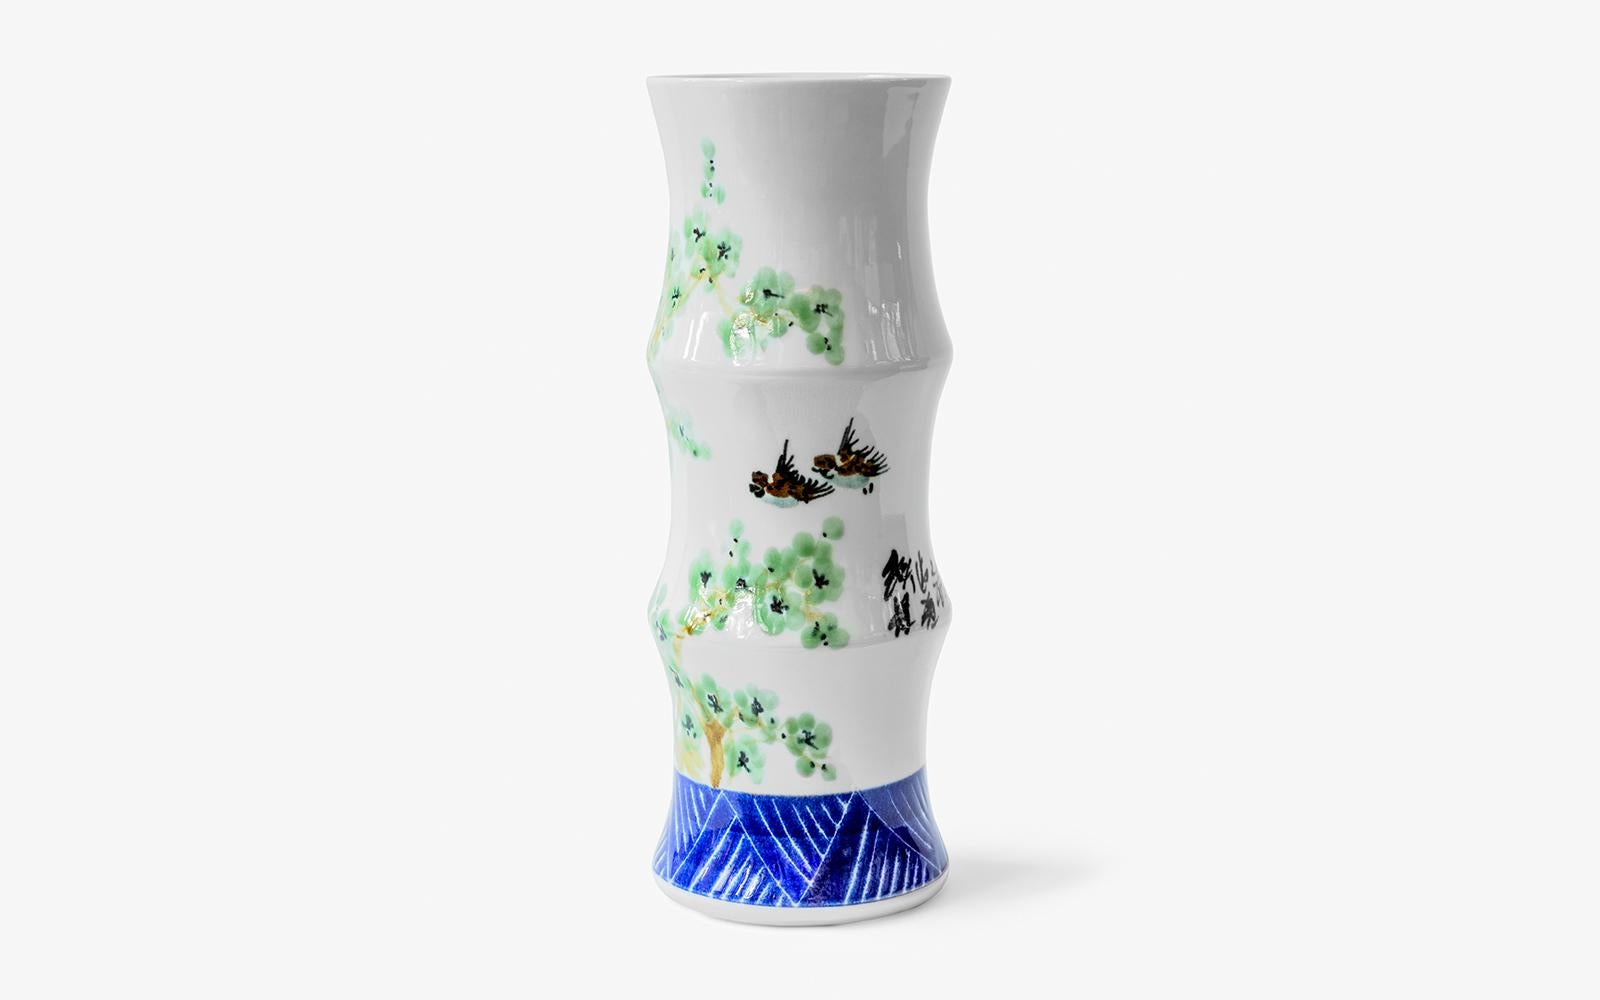 -Imported Chinese porcelain
-A unique hand made vase 
-Individually produced in traditional Chinese porcelain techniques
-Hand painted signed
-It is a beautiful object for home decor, table decor.
-Flower stand
-Collectable object.
 